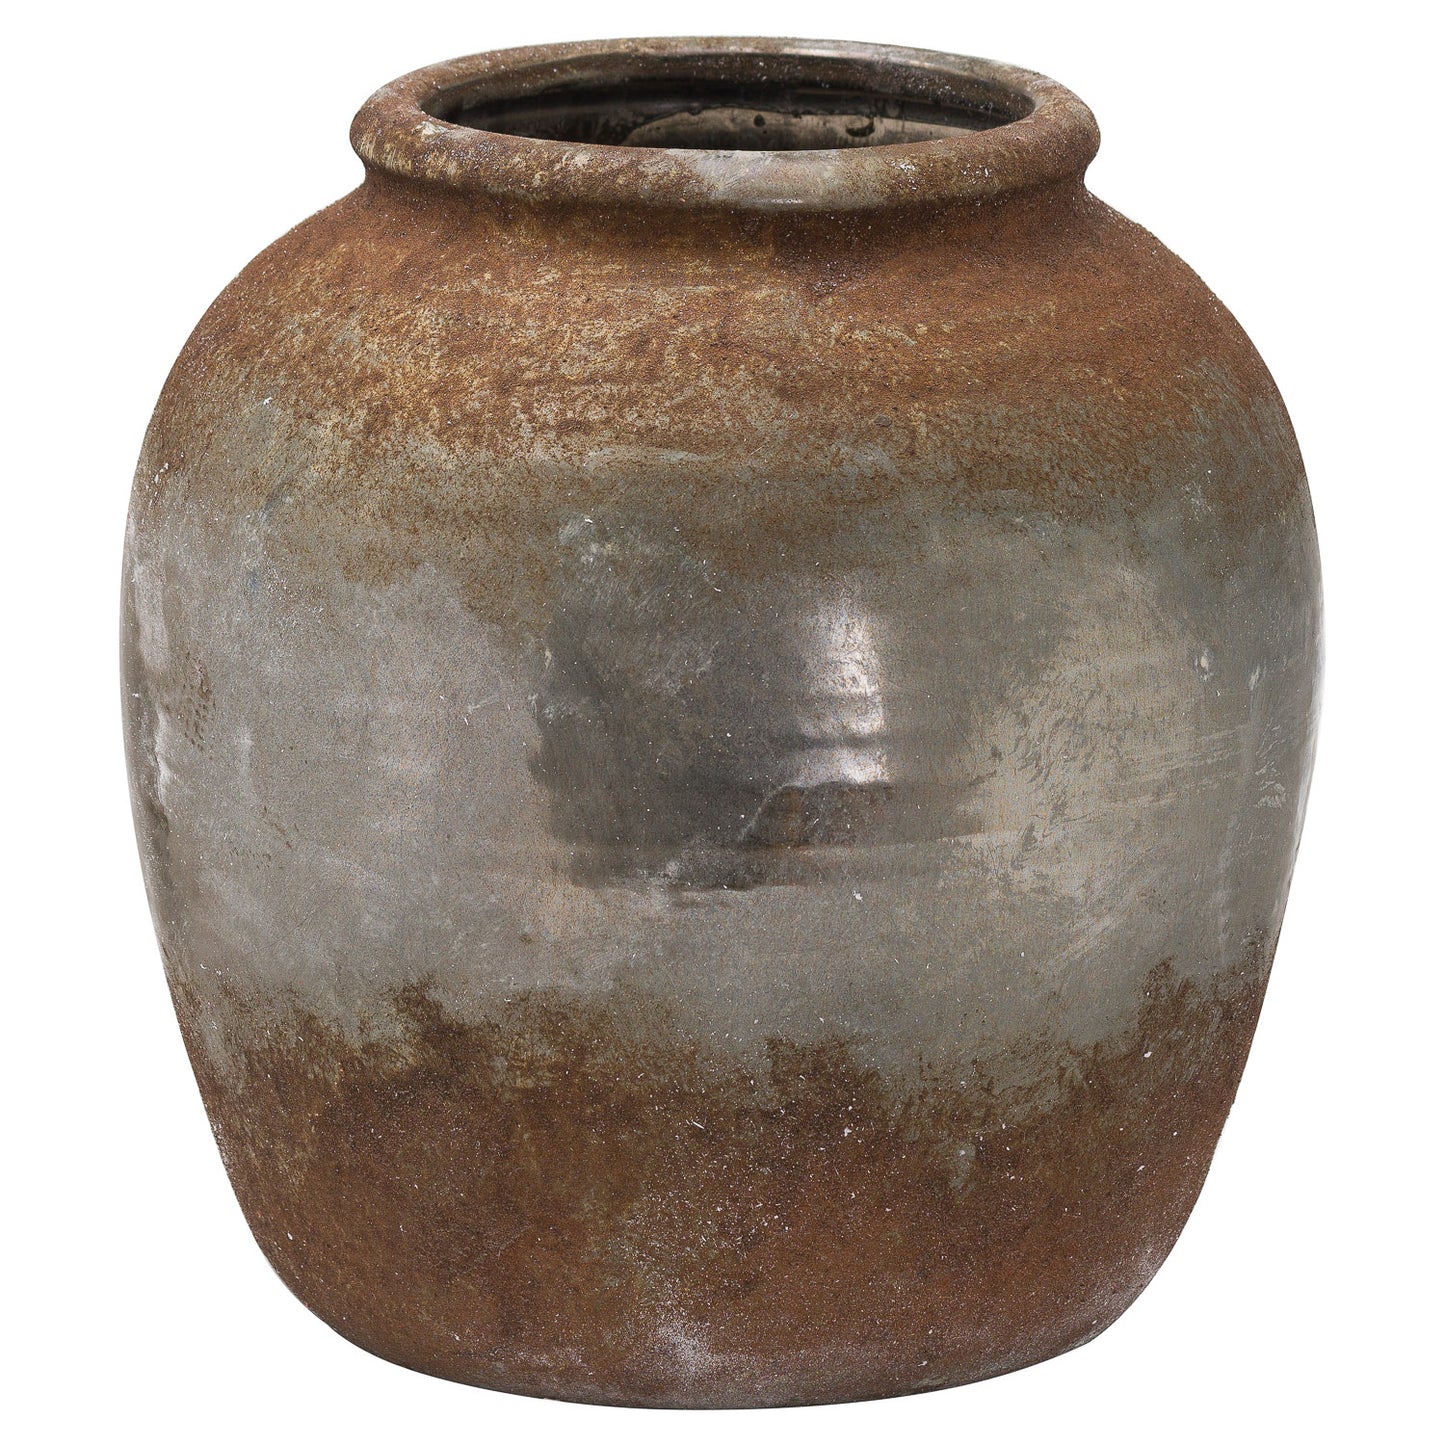 Aged Stone Earthy Textured Hand Painted Extra Large Vase